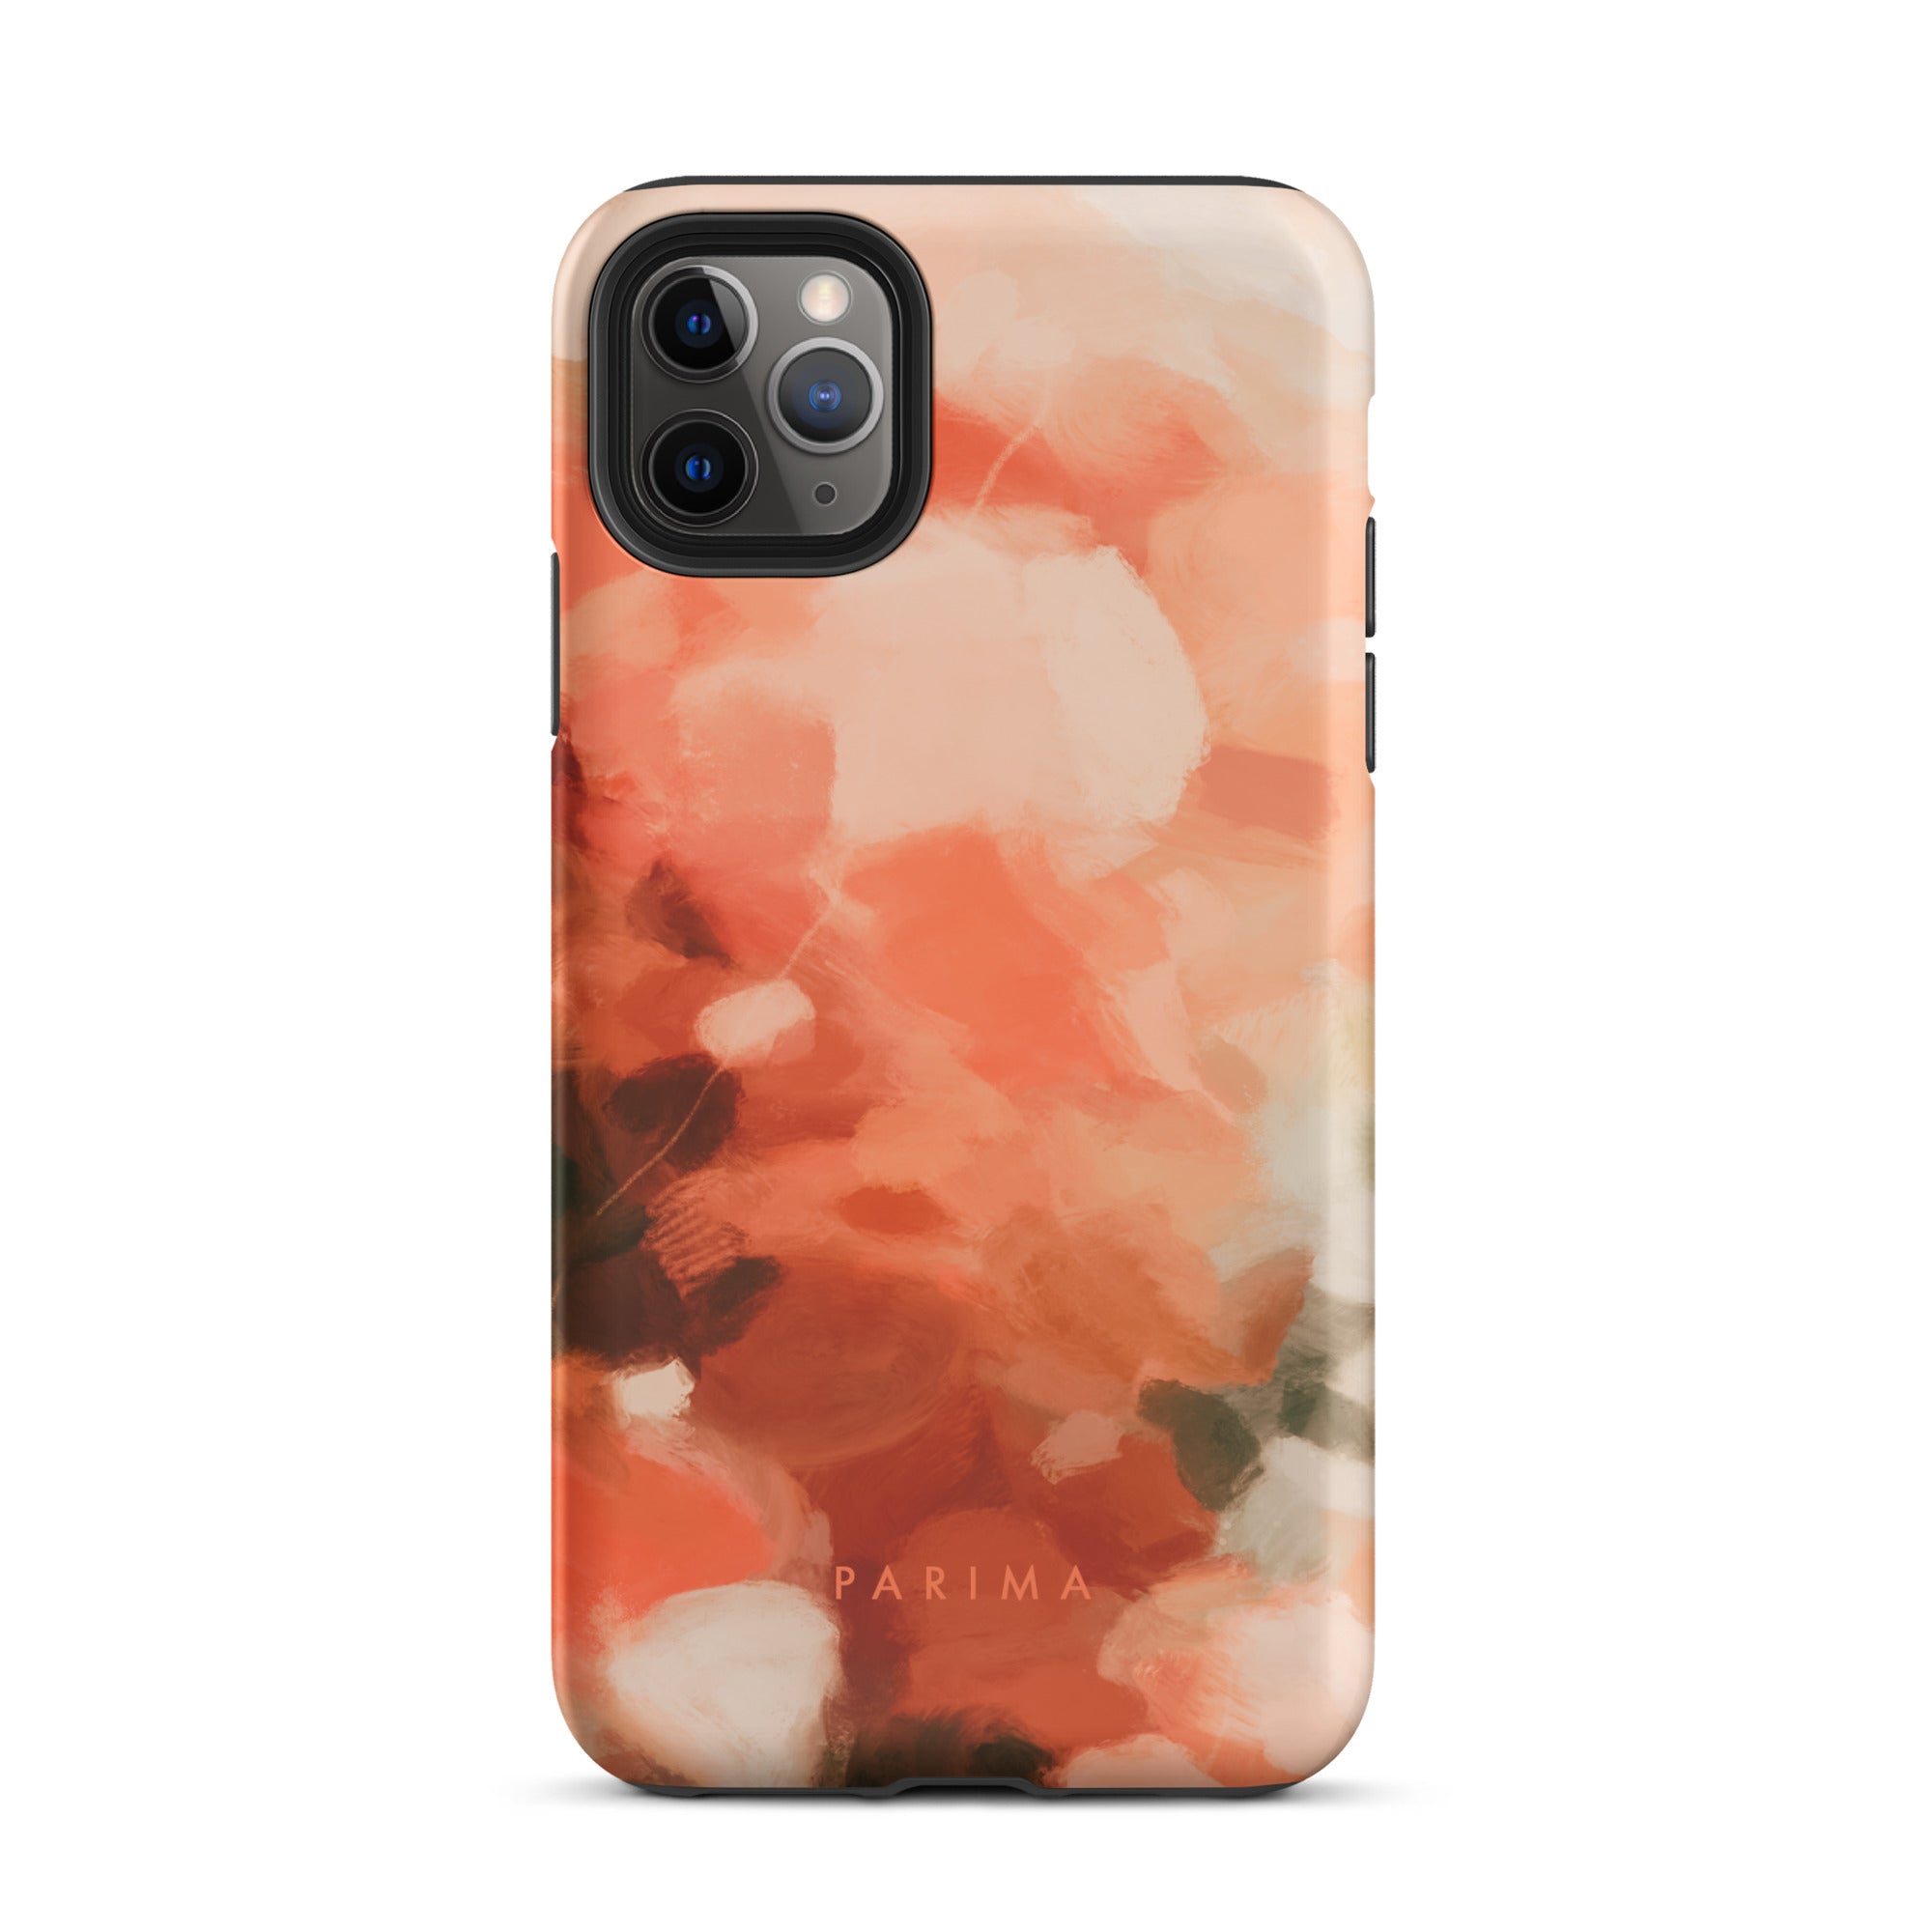 Sweet Nectar, orange and pink abstract art - iPhone 11 Pro Max tough case by Parima Studio